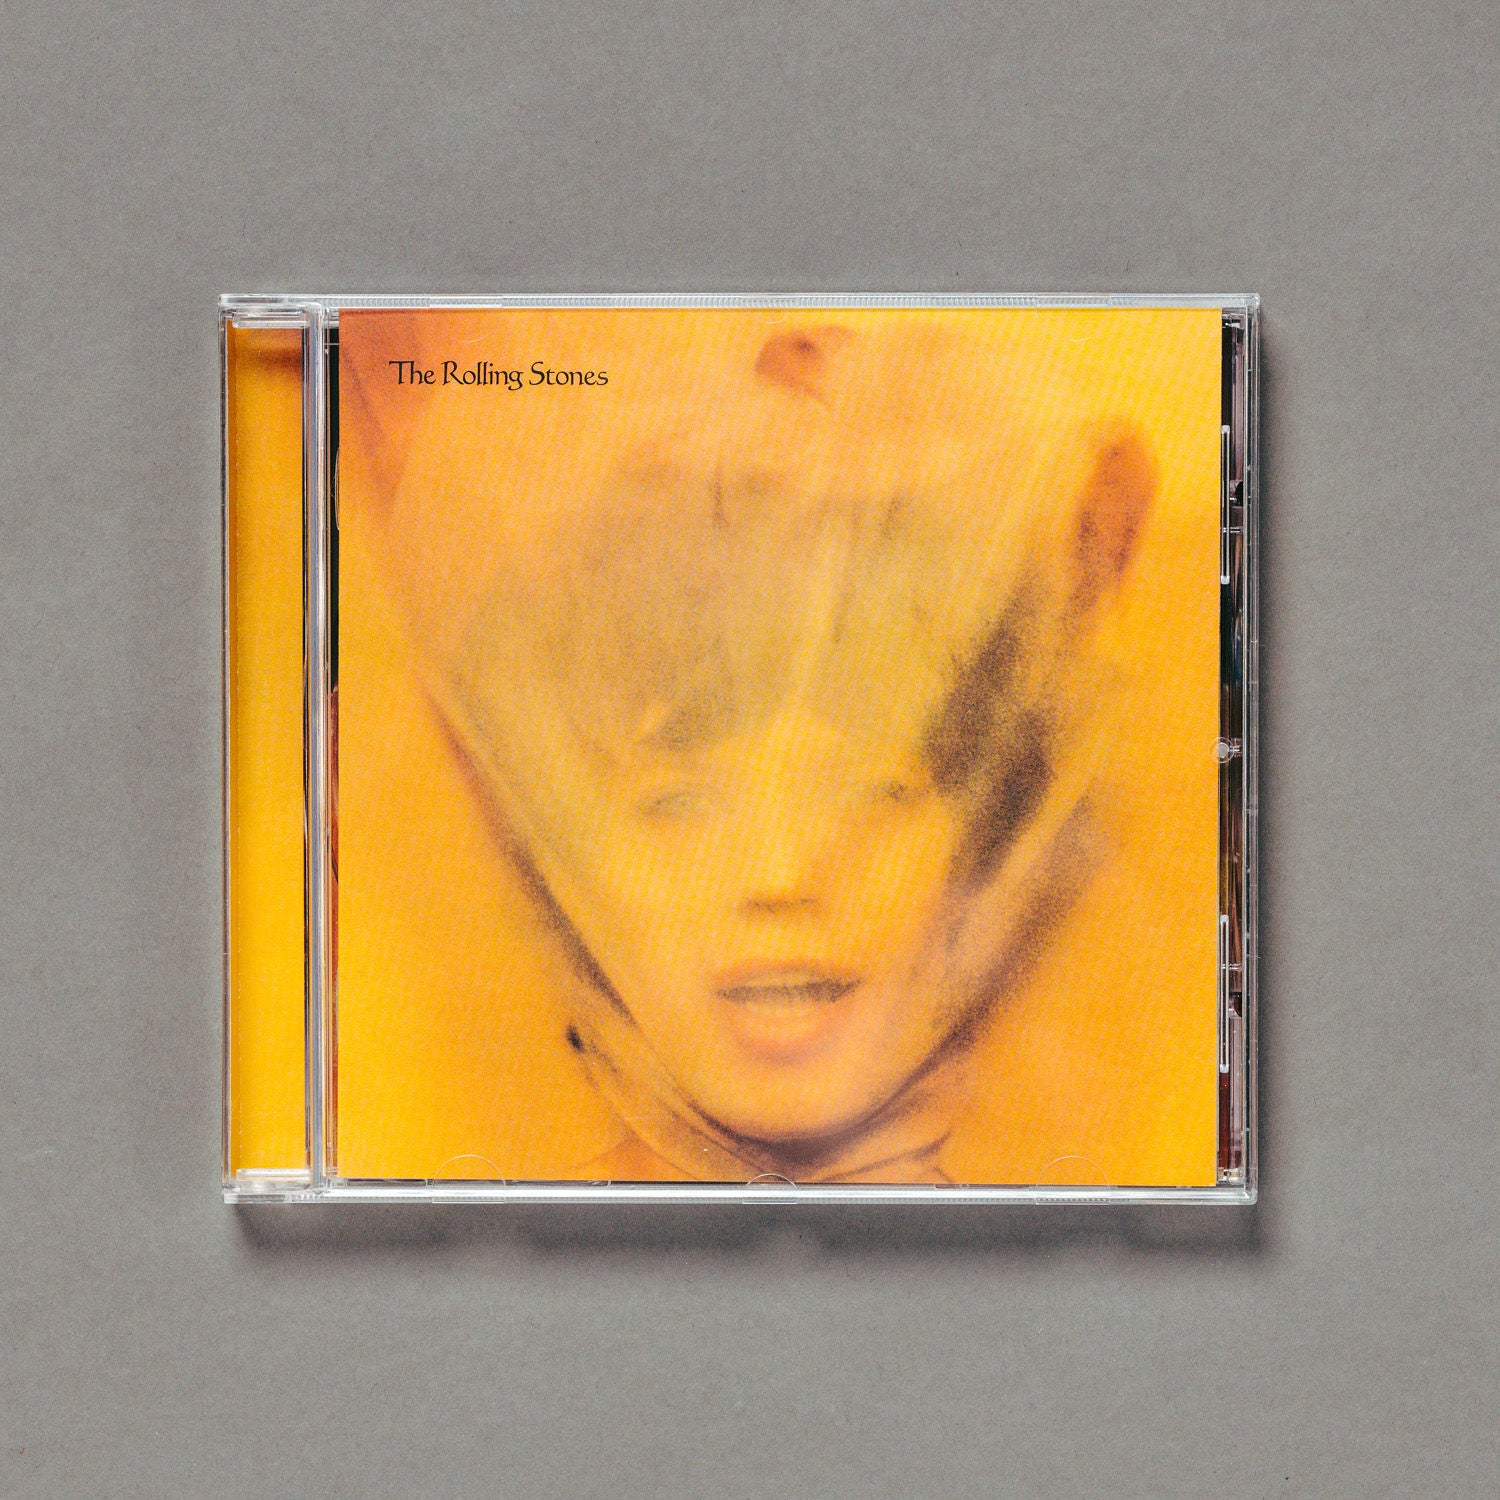 The Rolling Stones - Goats Head Soup 2020 CD